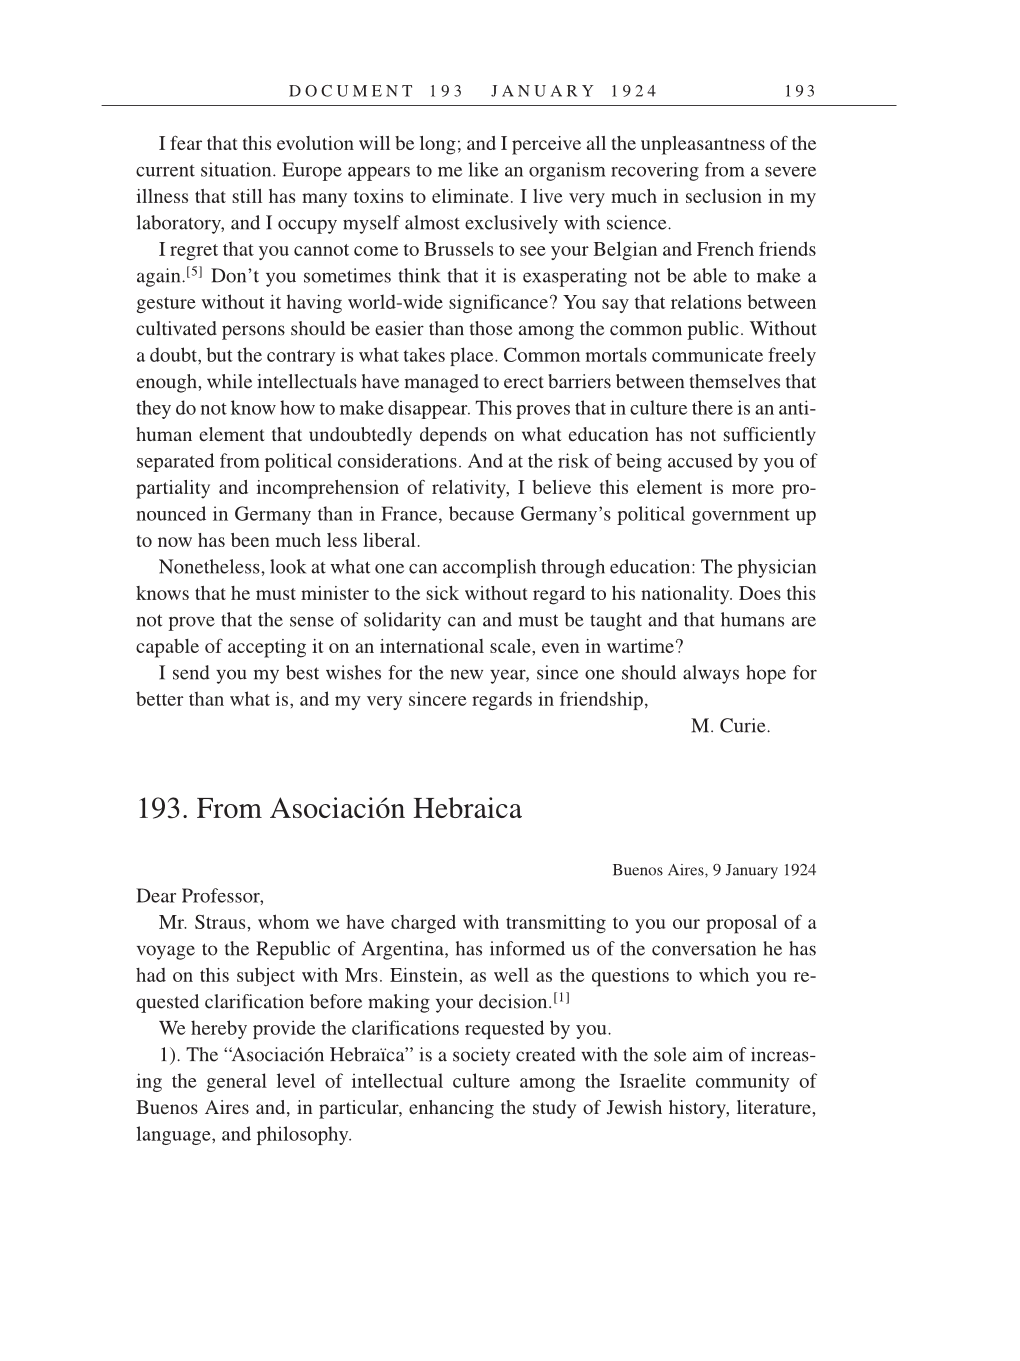 Volume 14: The Berlin Years: Writings & Correspondence, April 1923-May 1925 (English Translation Supplement) page 193